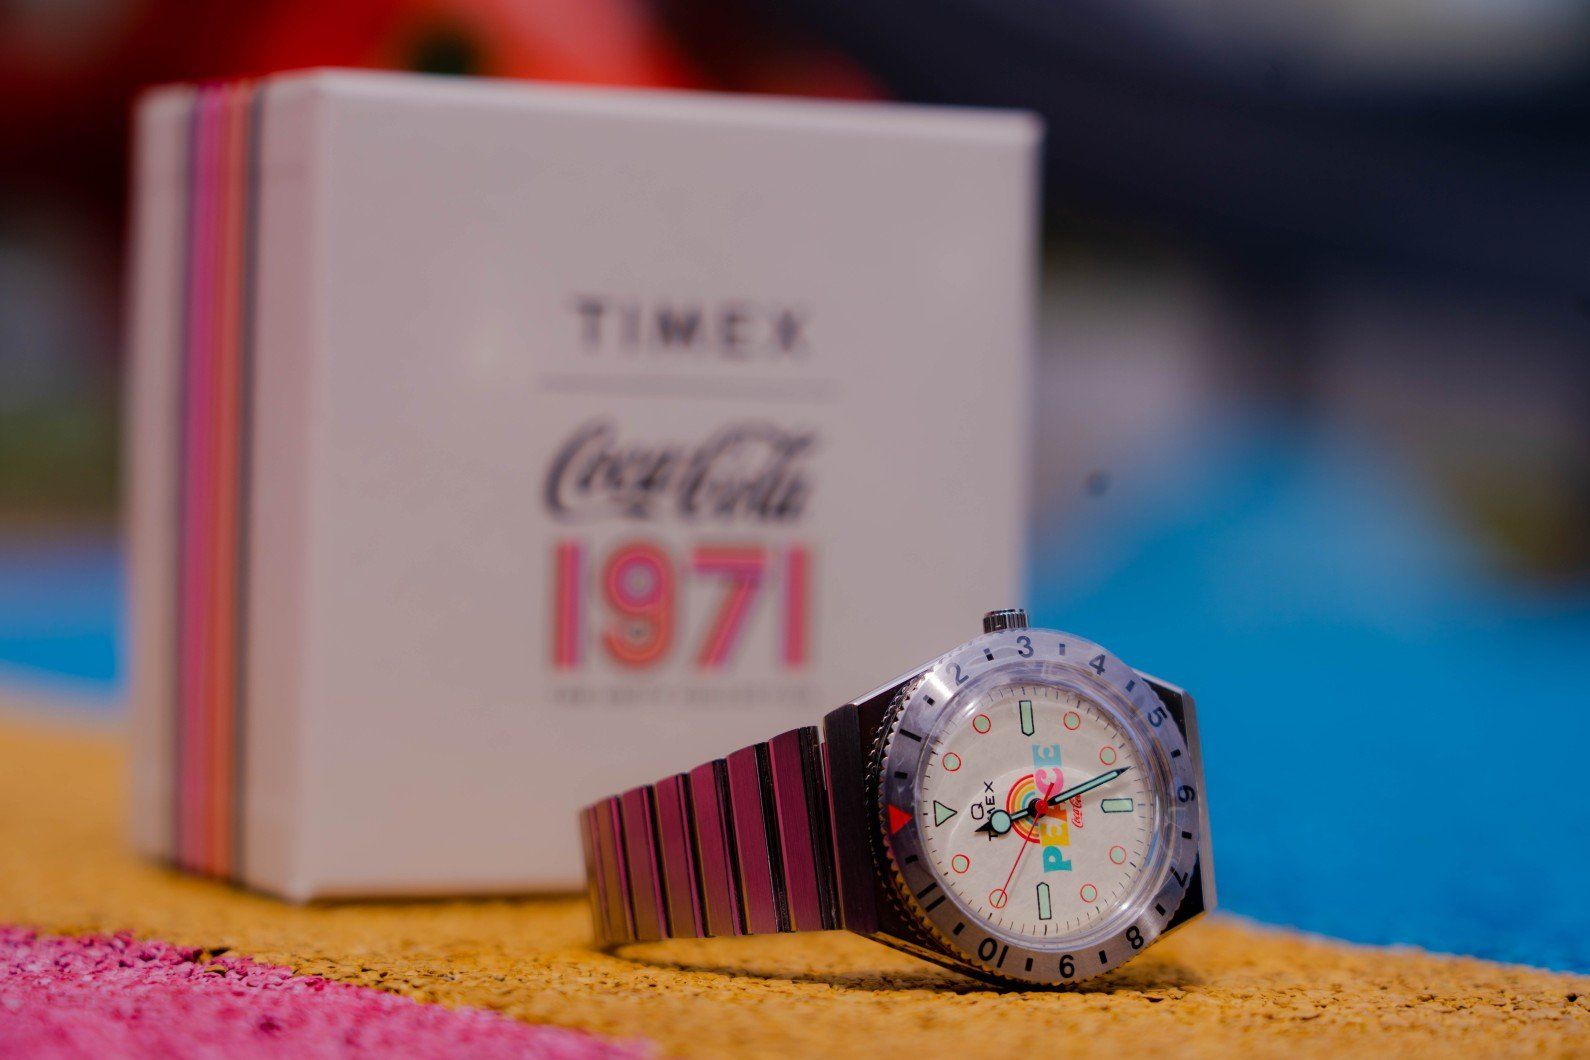 Q Timex, detailed with vintage hues and designs from the 70s.